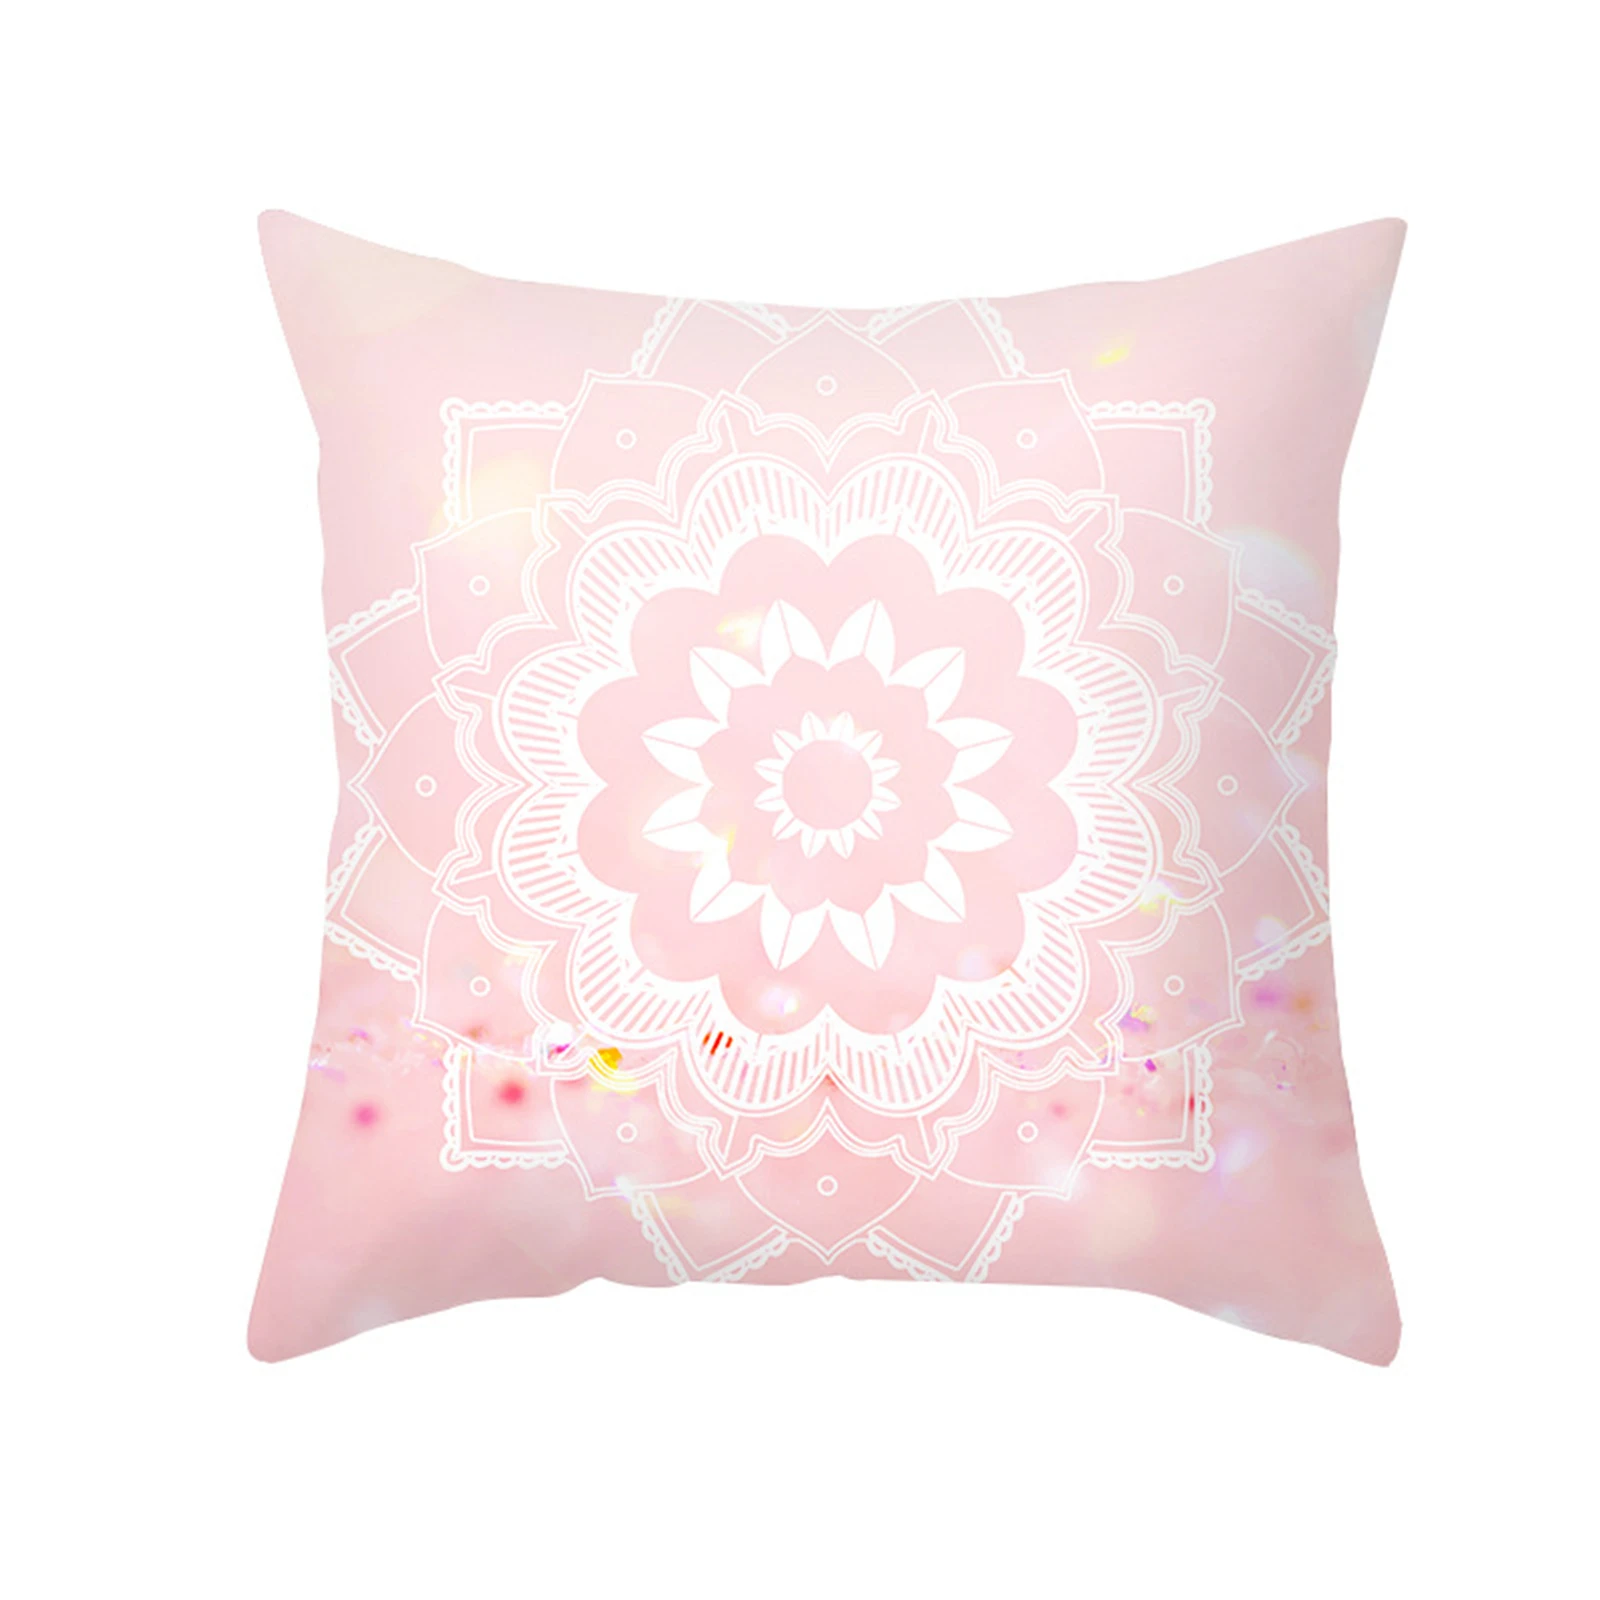 Fuwatacchi Geometric Sofa Pillow Case Pink Girl’s Bedroom Cushion Covers For Home Decor Party Holiday DIY Decorations 45x45cm alx